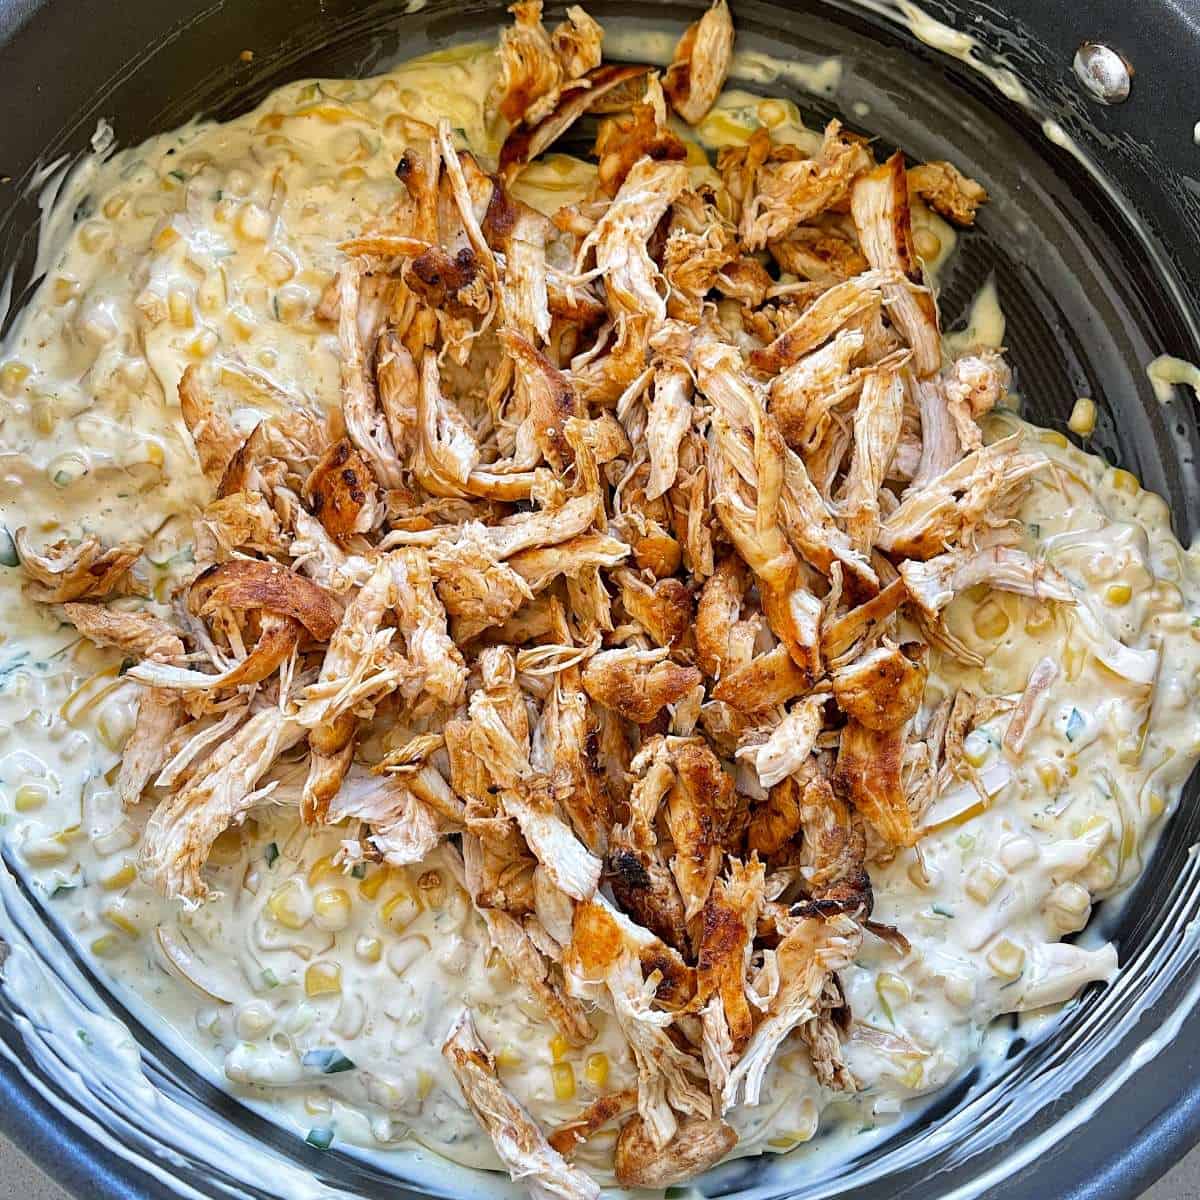 Shredded cooked chicken sitting on a creamy corn mixture in a frying pan. 